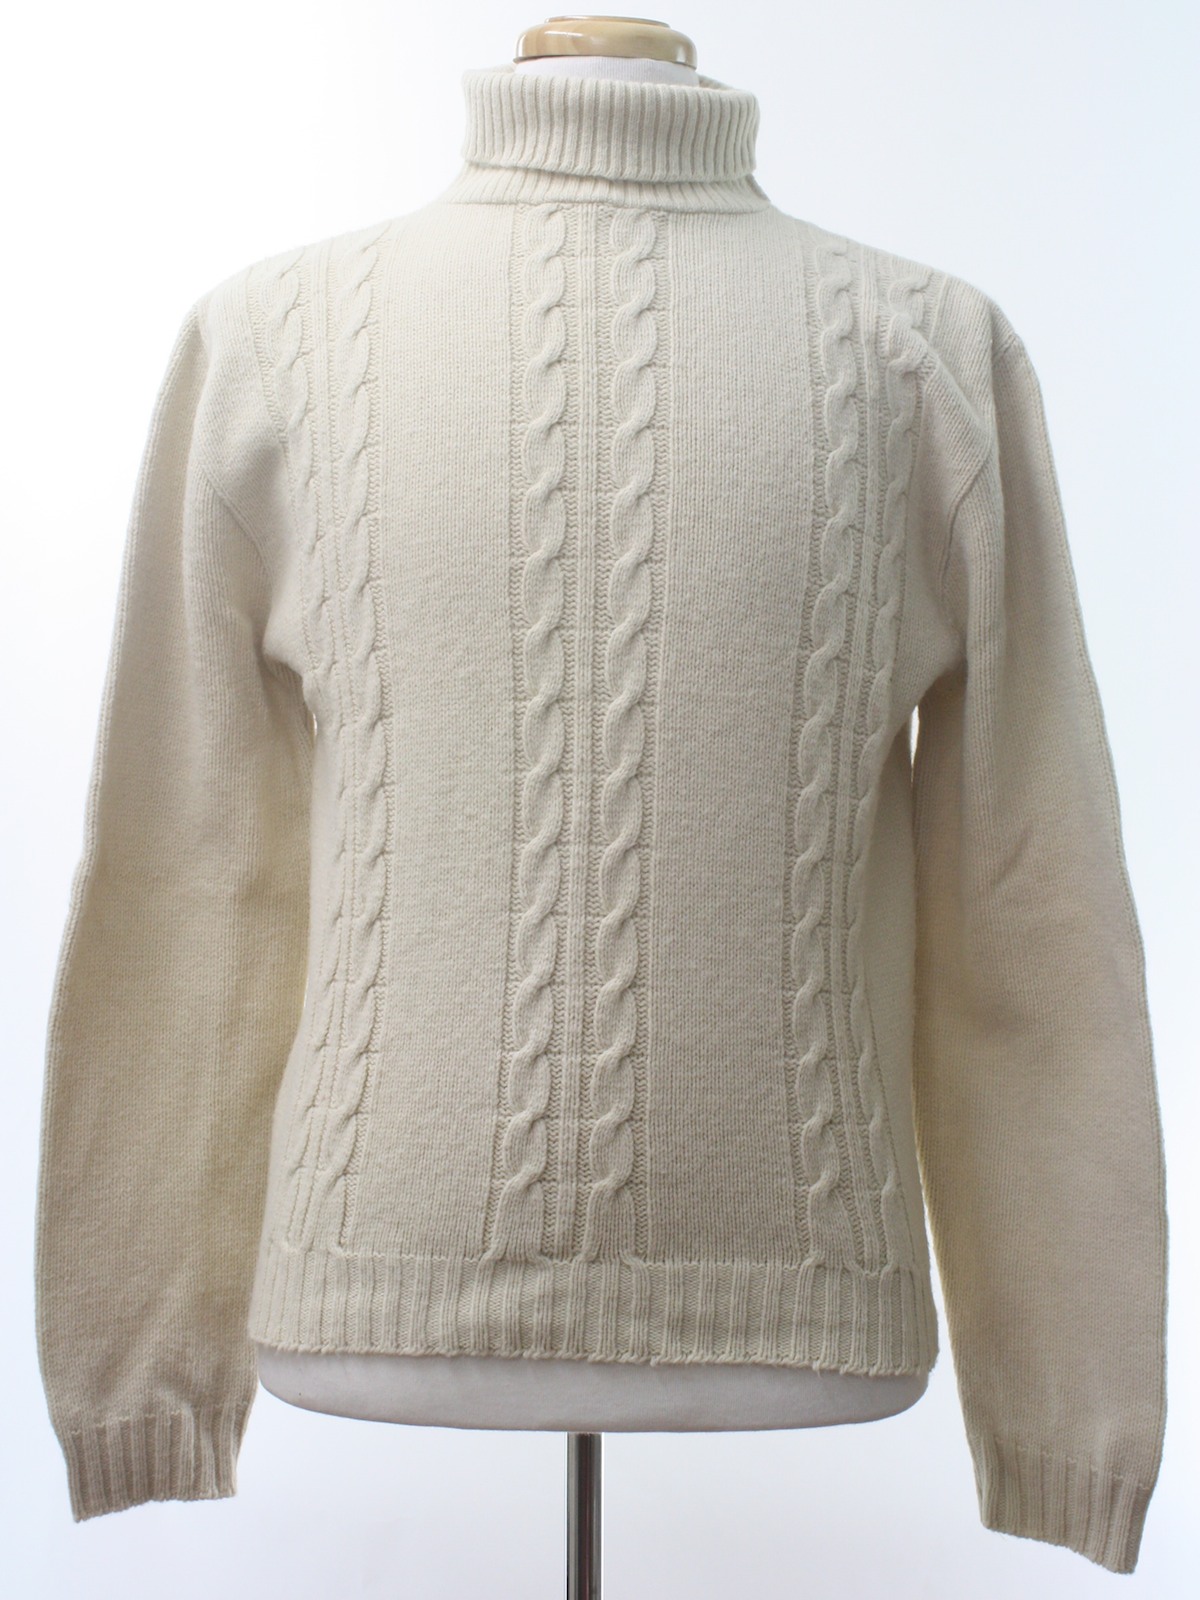 Brent Designed by Fabiani of Rome Sixties Vintage Sweater: 60s -Brent ...